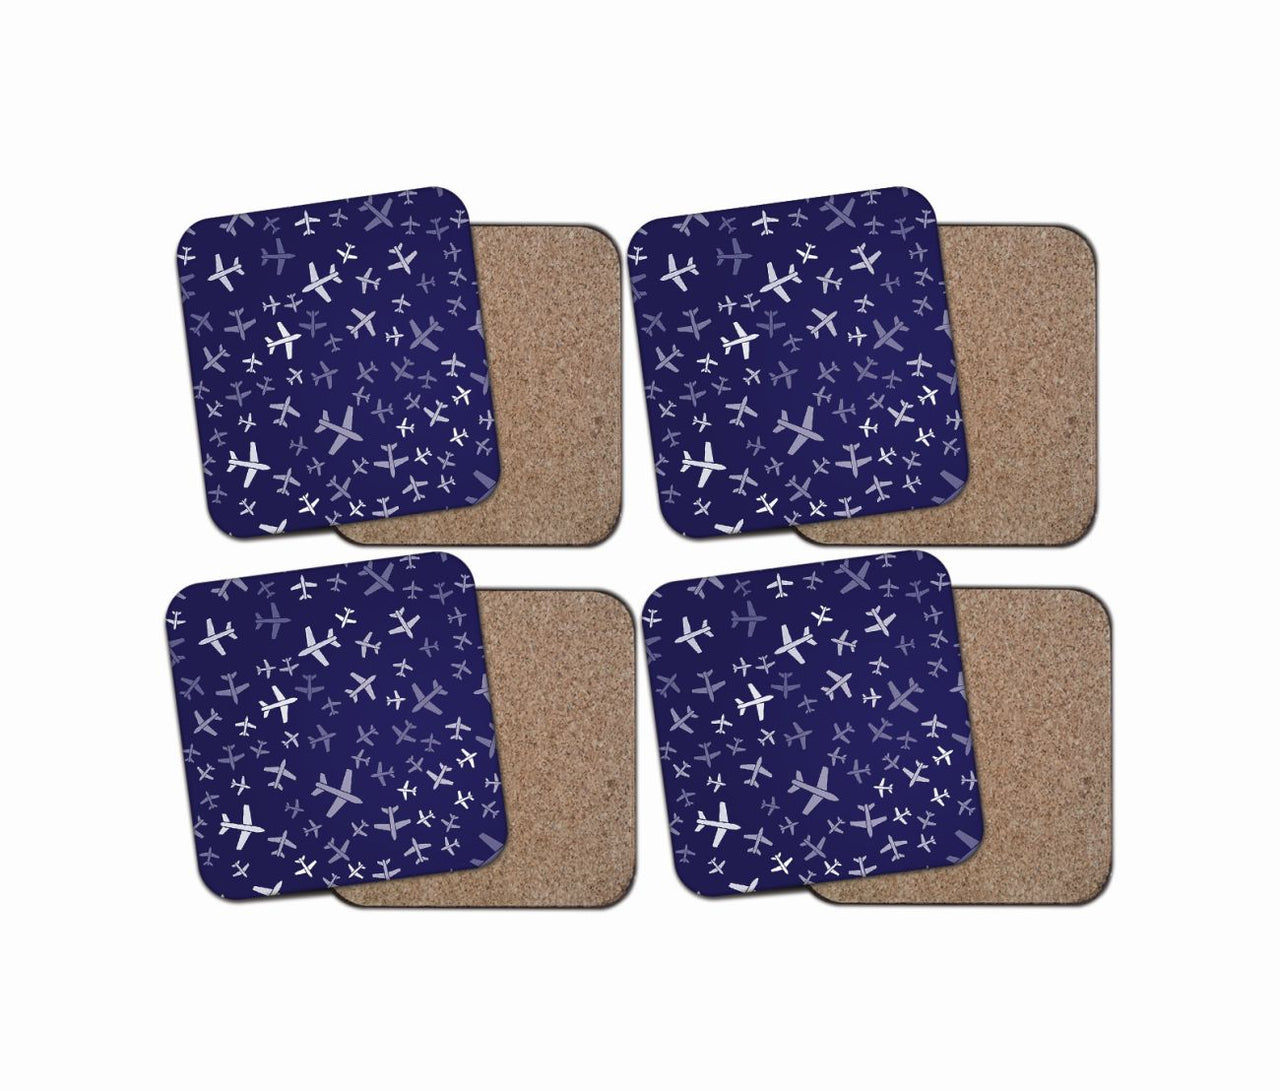 Different Sizes Seamless Airplanes Designed Coasters